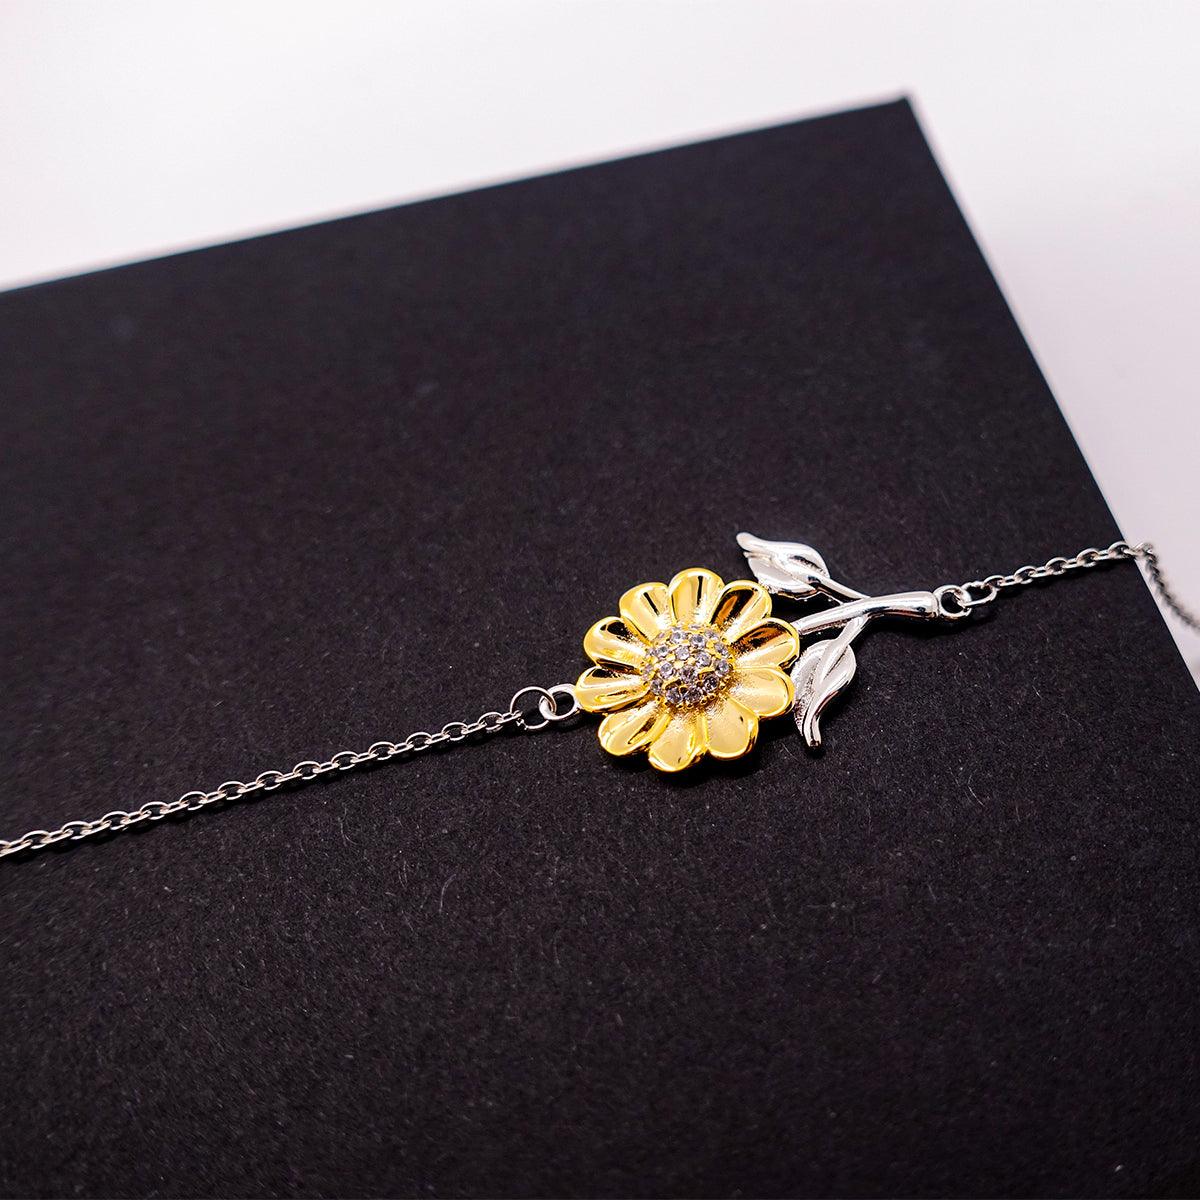 Reporter Sunflower Bracelet - Thanks for being who you are - Birthday Christmas Jewelry Gifts Coworkers Colleague Boss - Mallard Moon Gift Shop